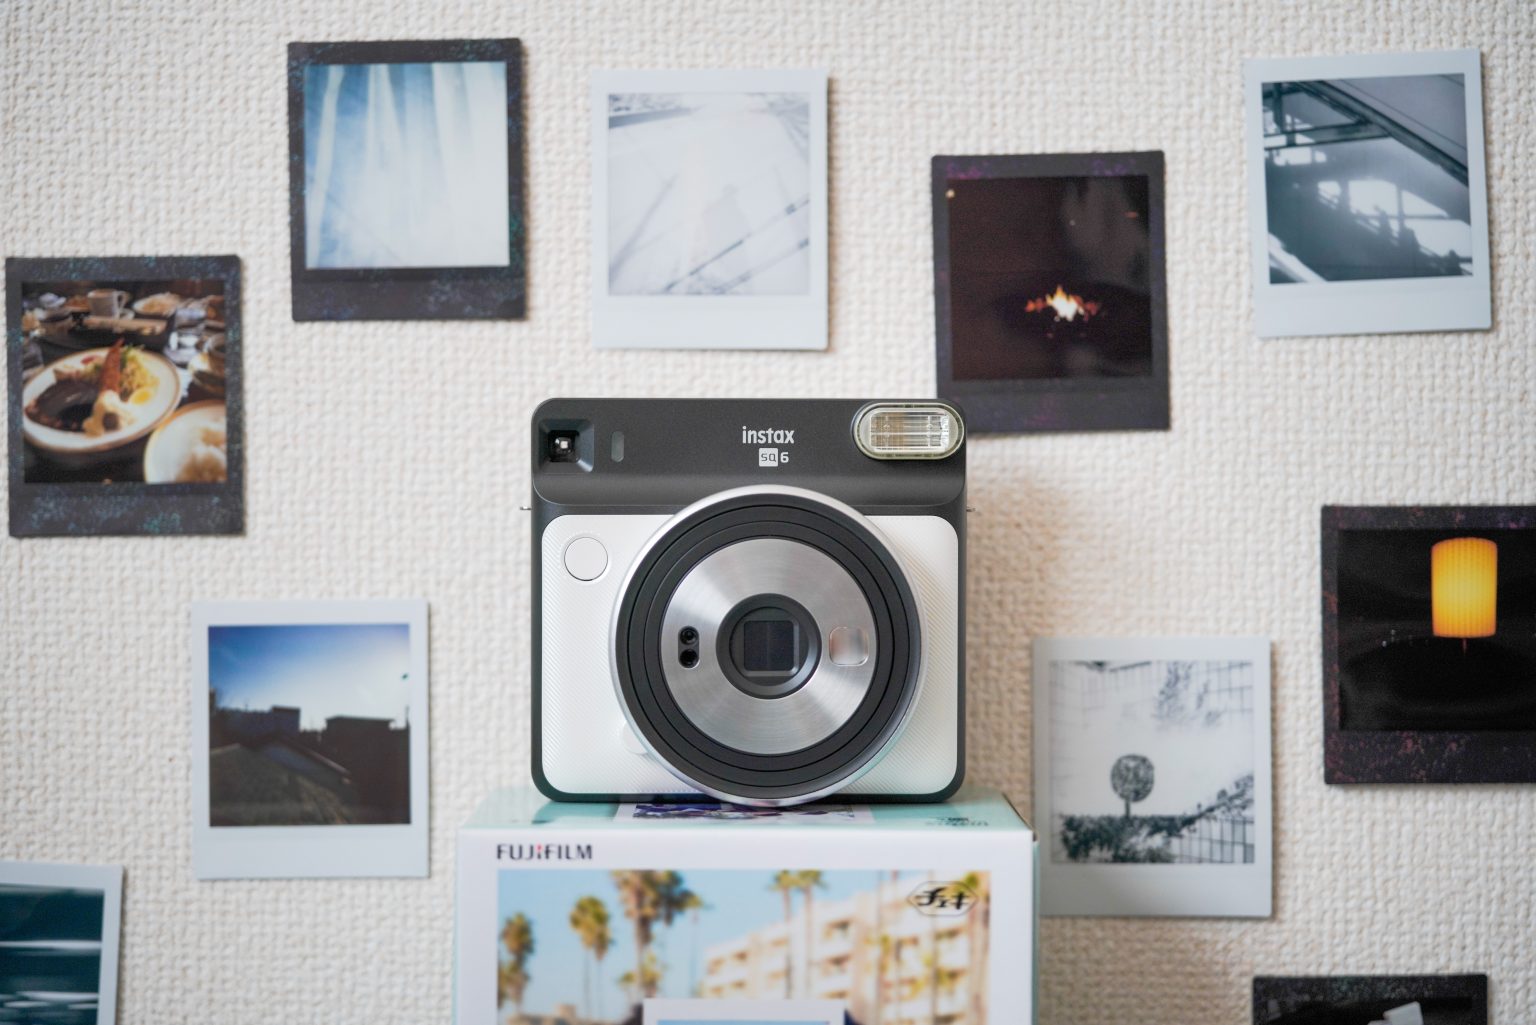 FUJIFILM】チェキの進化が凄い！instax SQUARE SQ6 Vol.8 | THE MAP TIMES